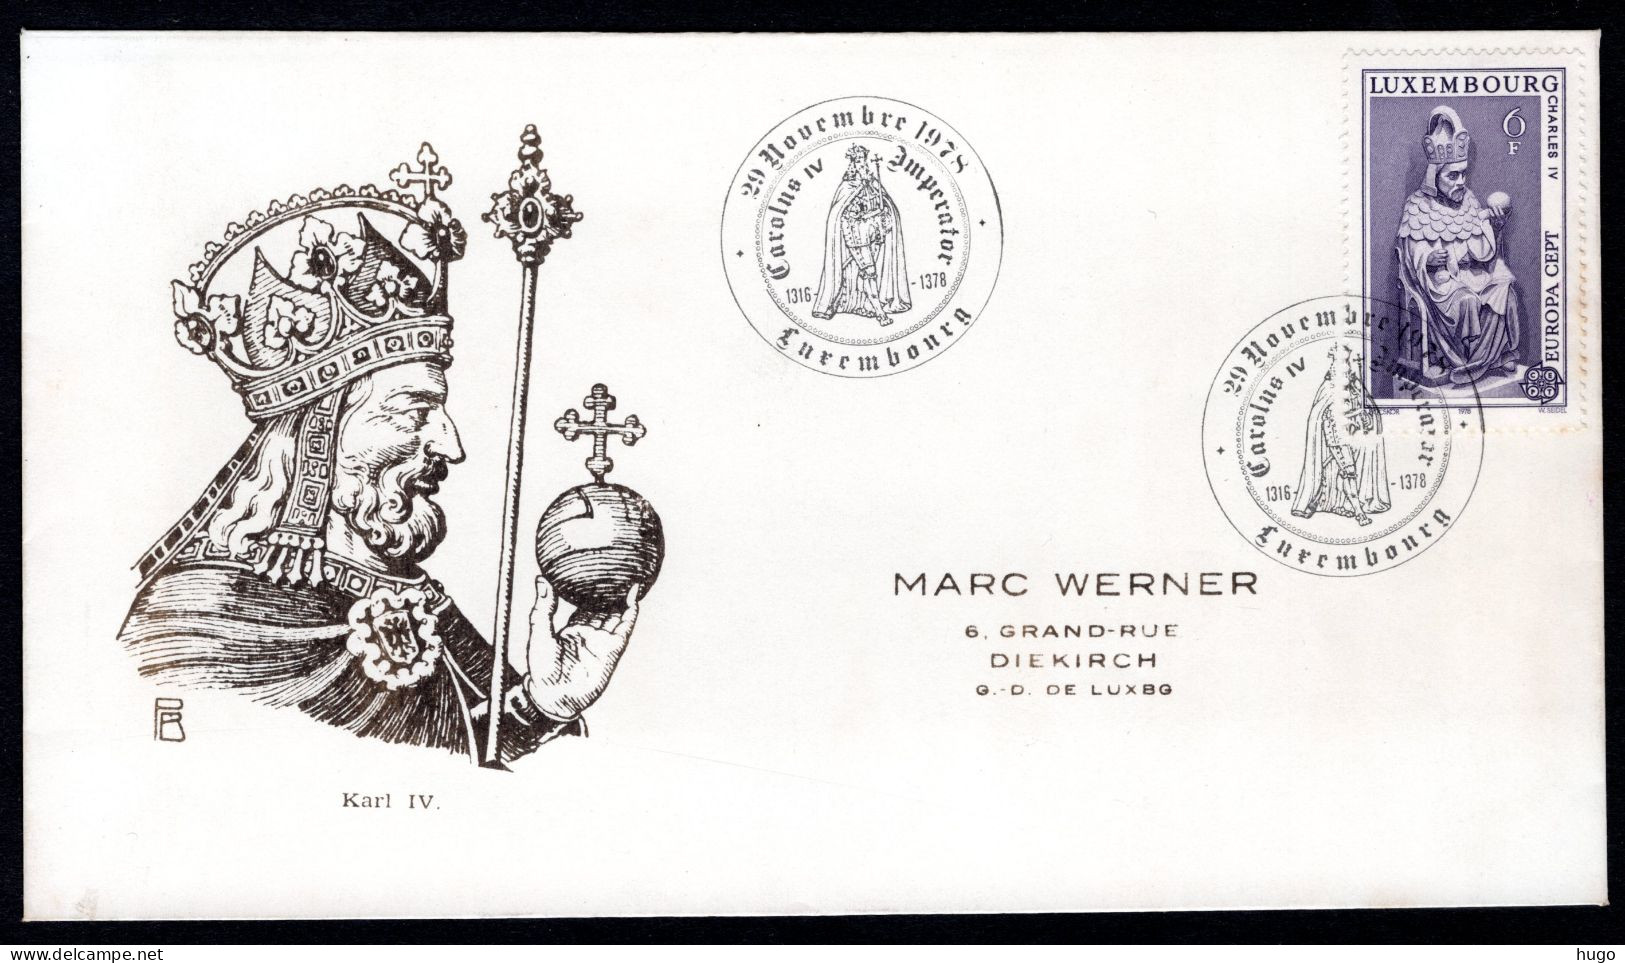 LUXEMBURG Yt. 917 FDC 1978 - EUROPA - Covers & Documents